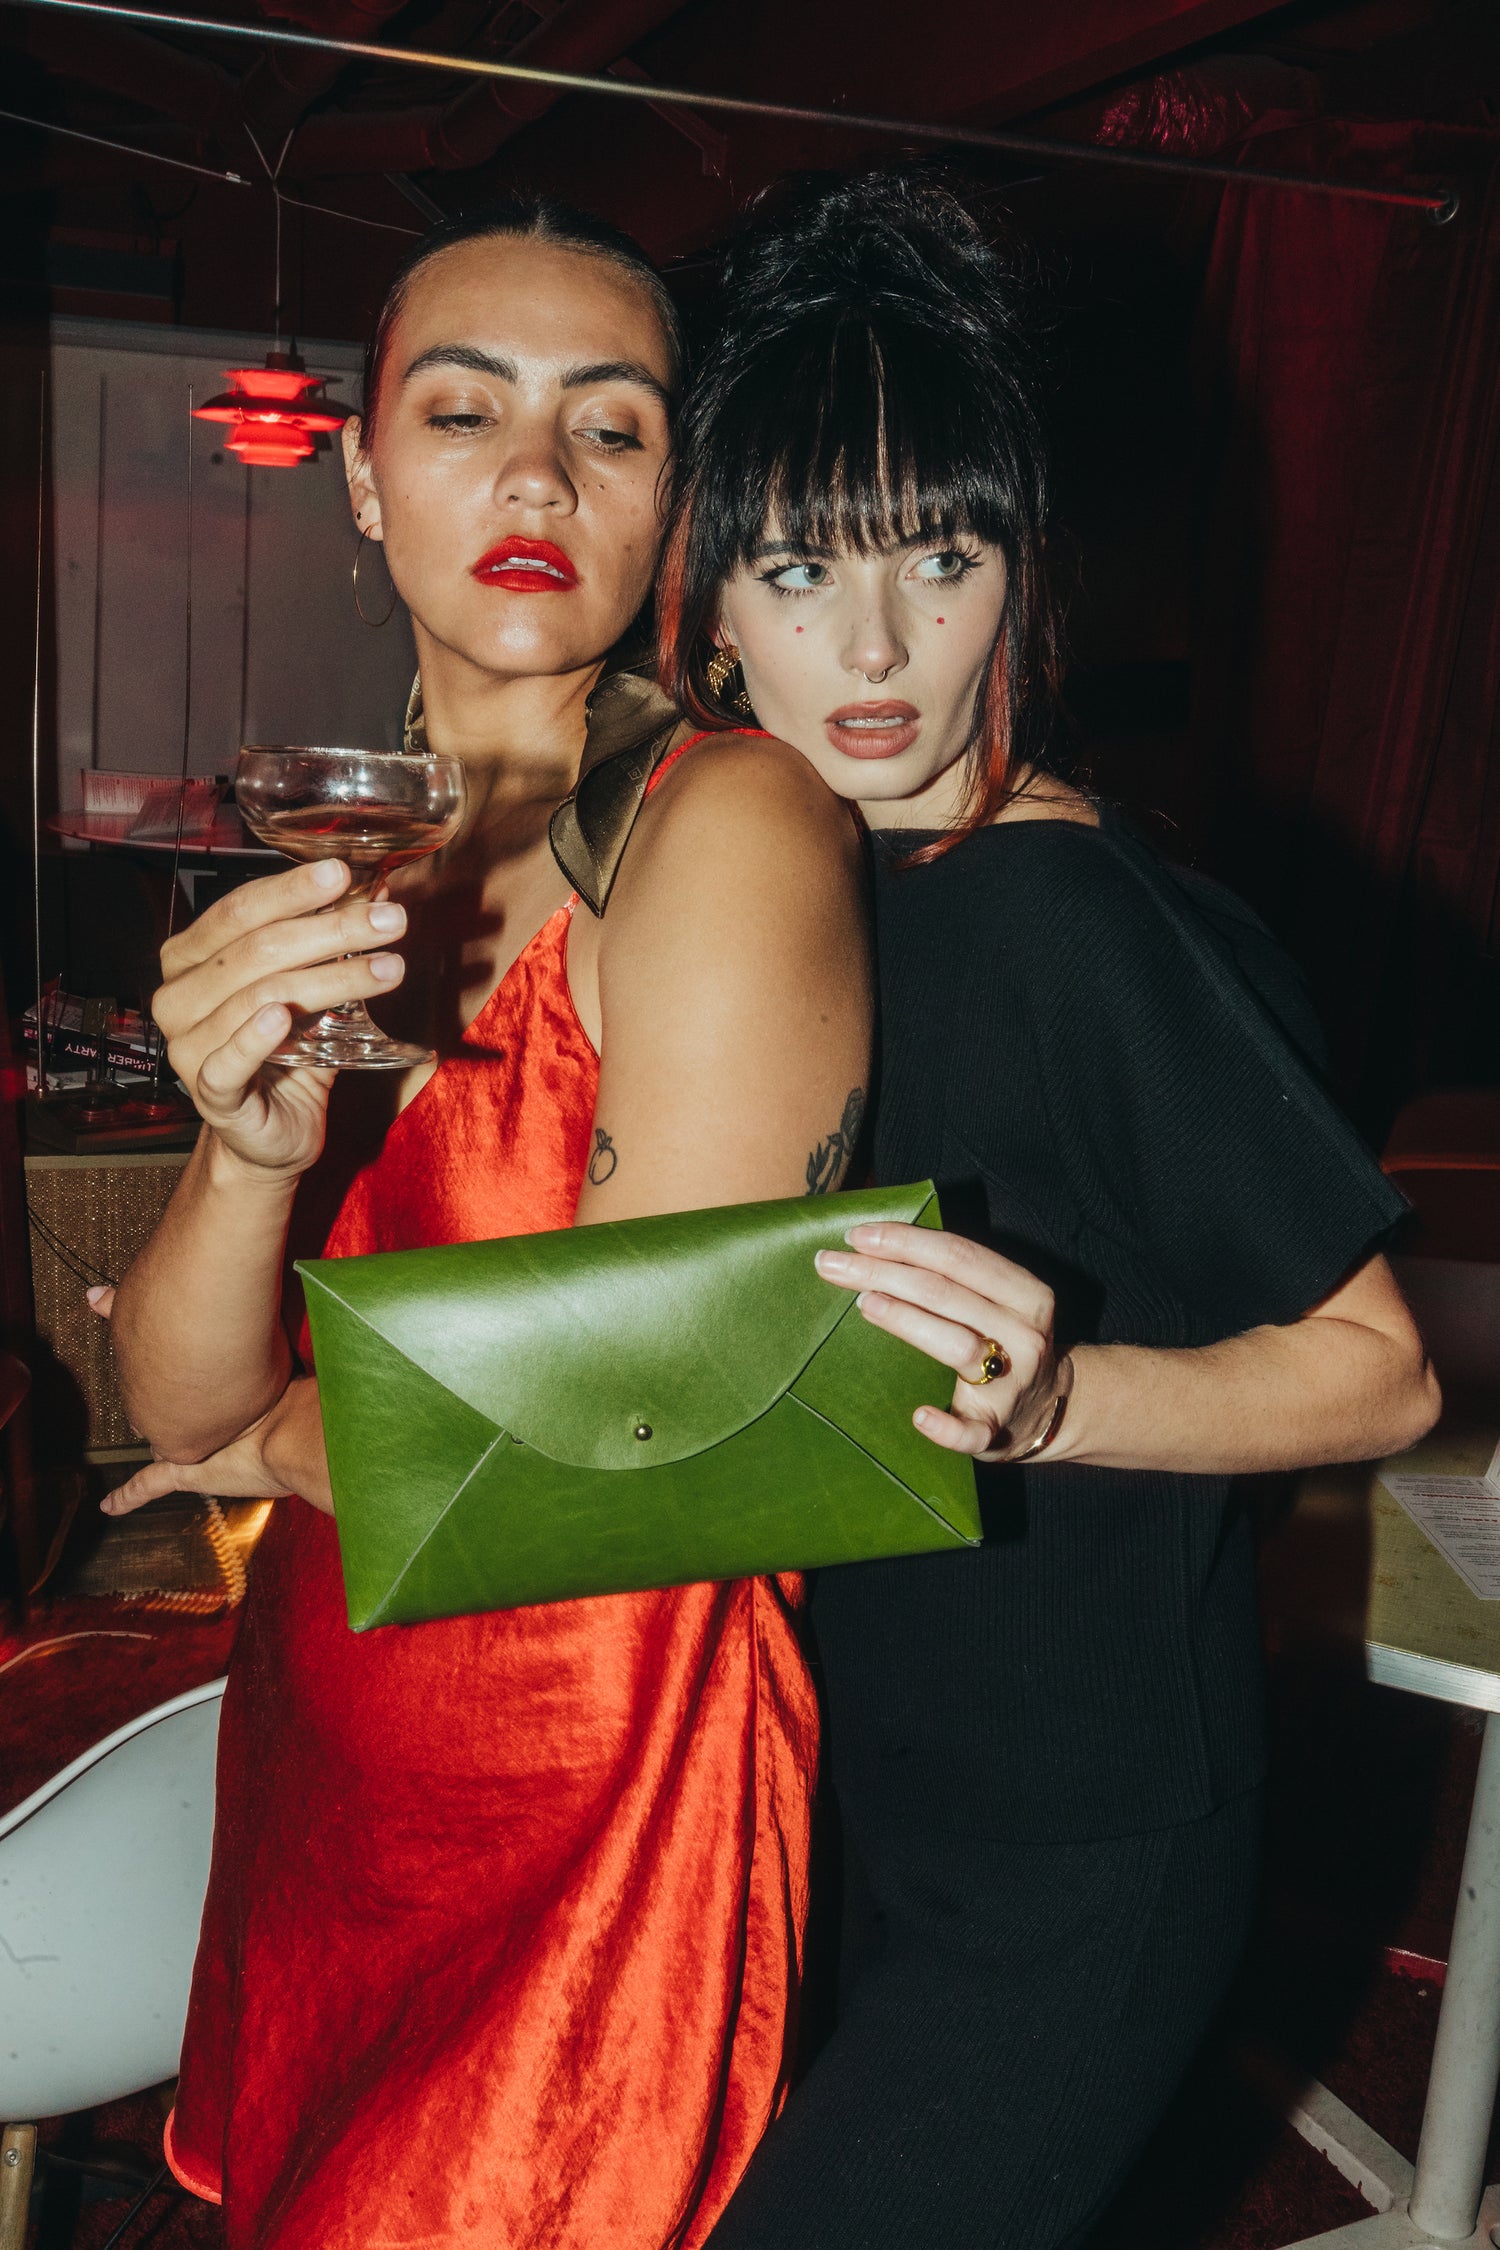 phoebe is a latina woman wearing the danielle dean little red dress drinking a martini while moe, a white woman wearing the nia thomas mujer + hombre set, holds a green envelope clutch by elidia the label.